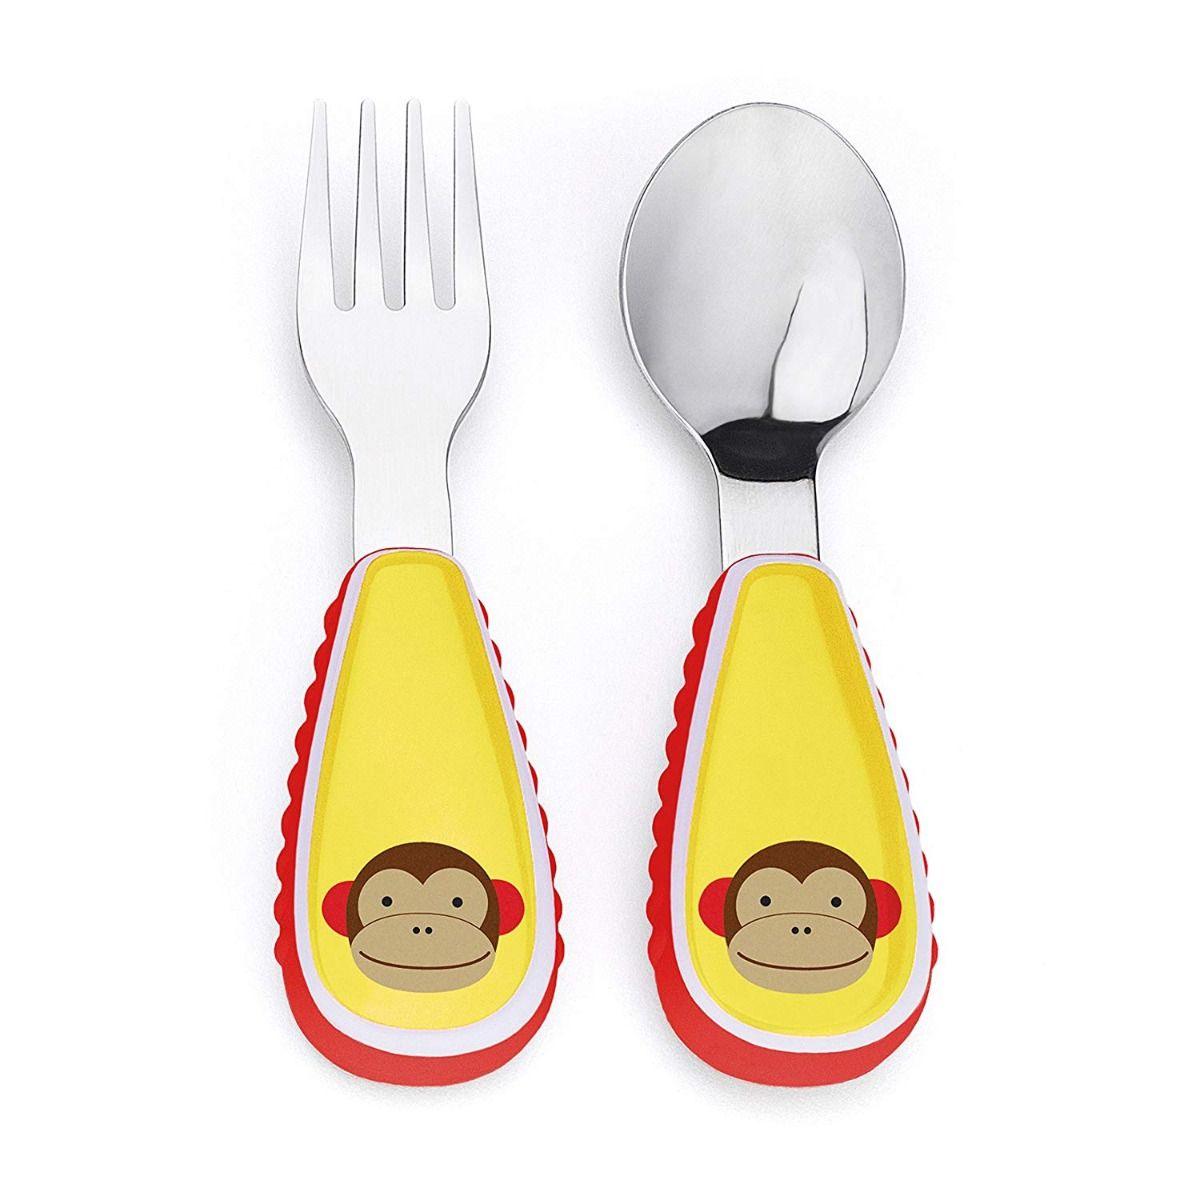 Skip Hop Zoo Utensils Fork & Spoon Monkey - Weaning Accessory For Ages 0-3 Years